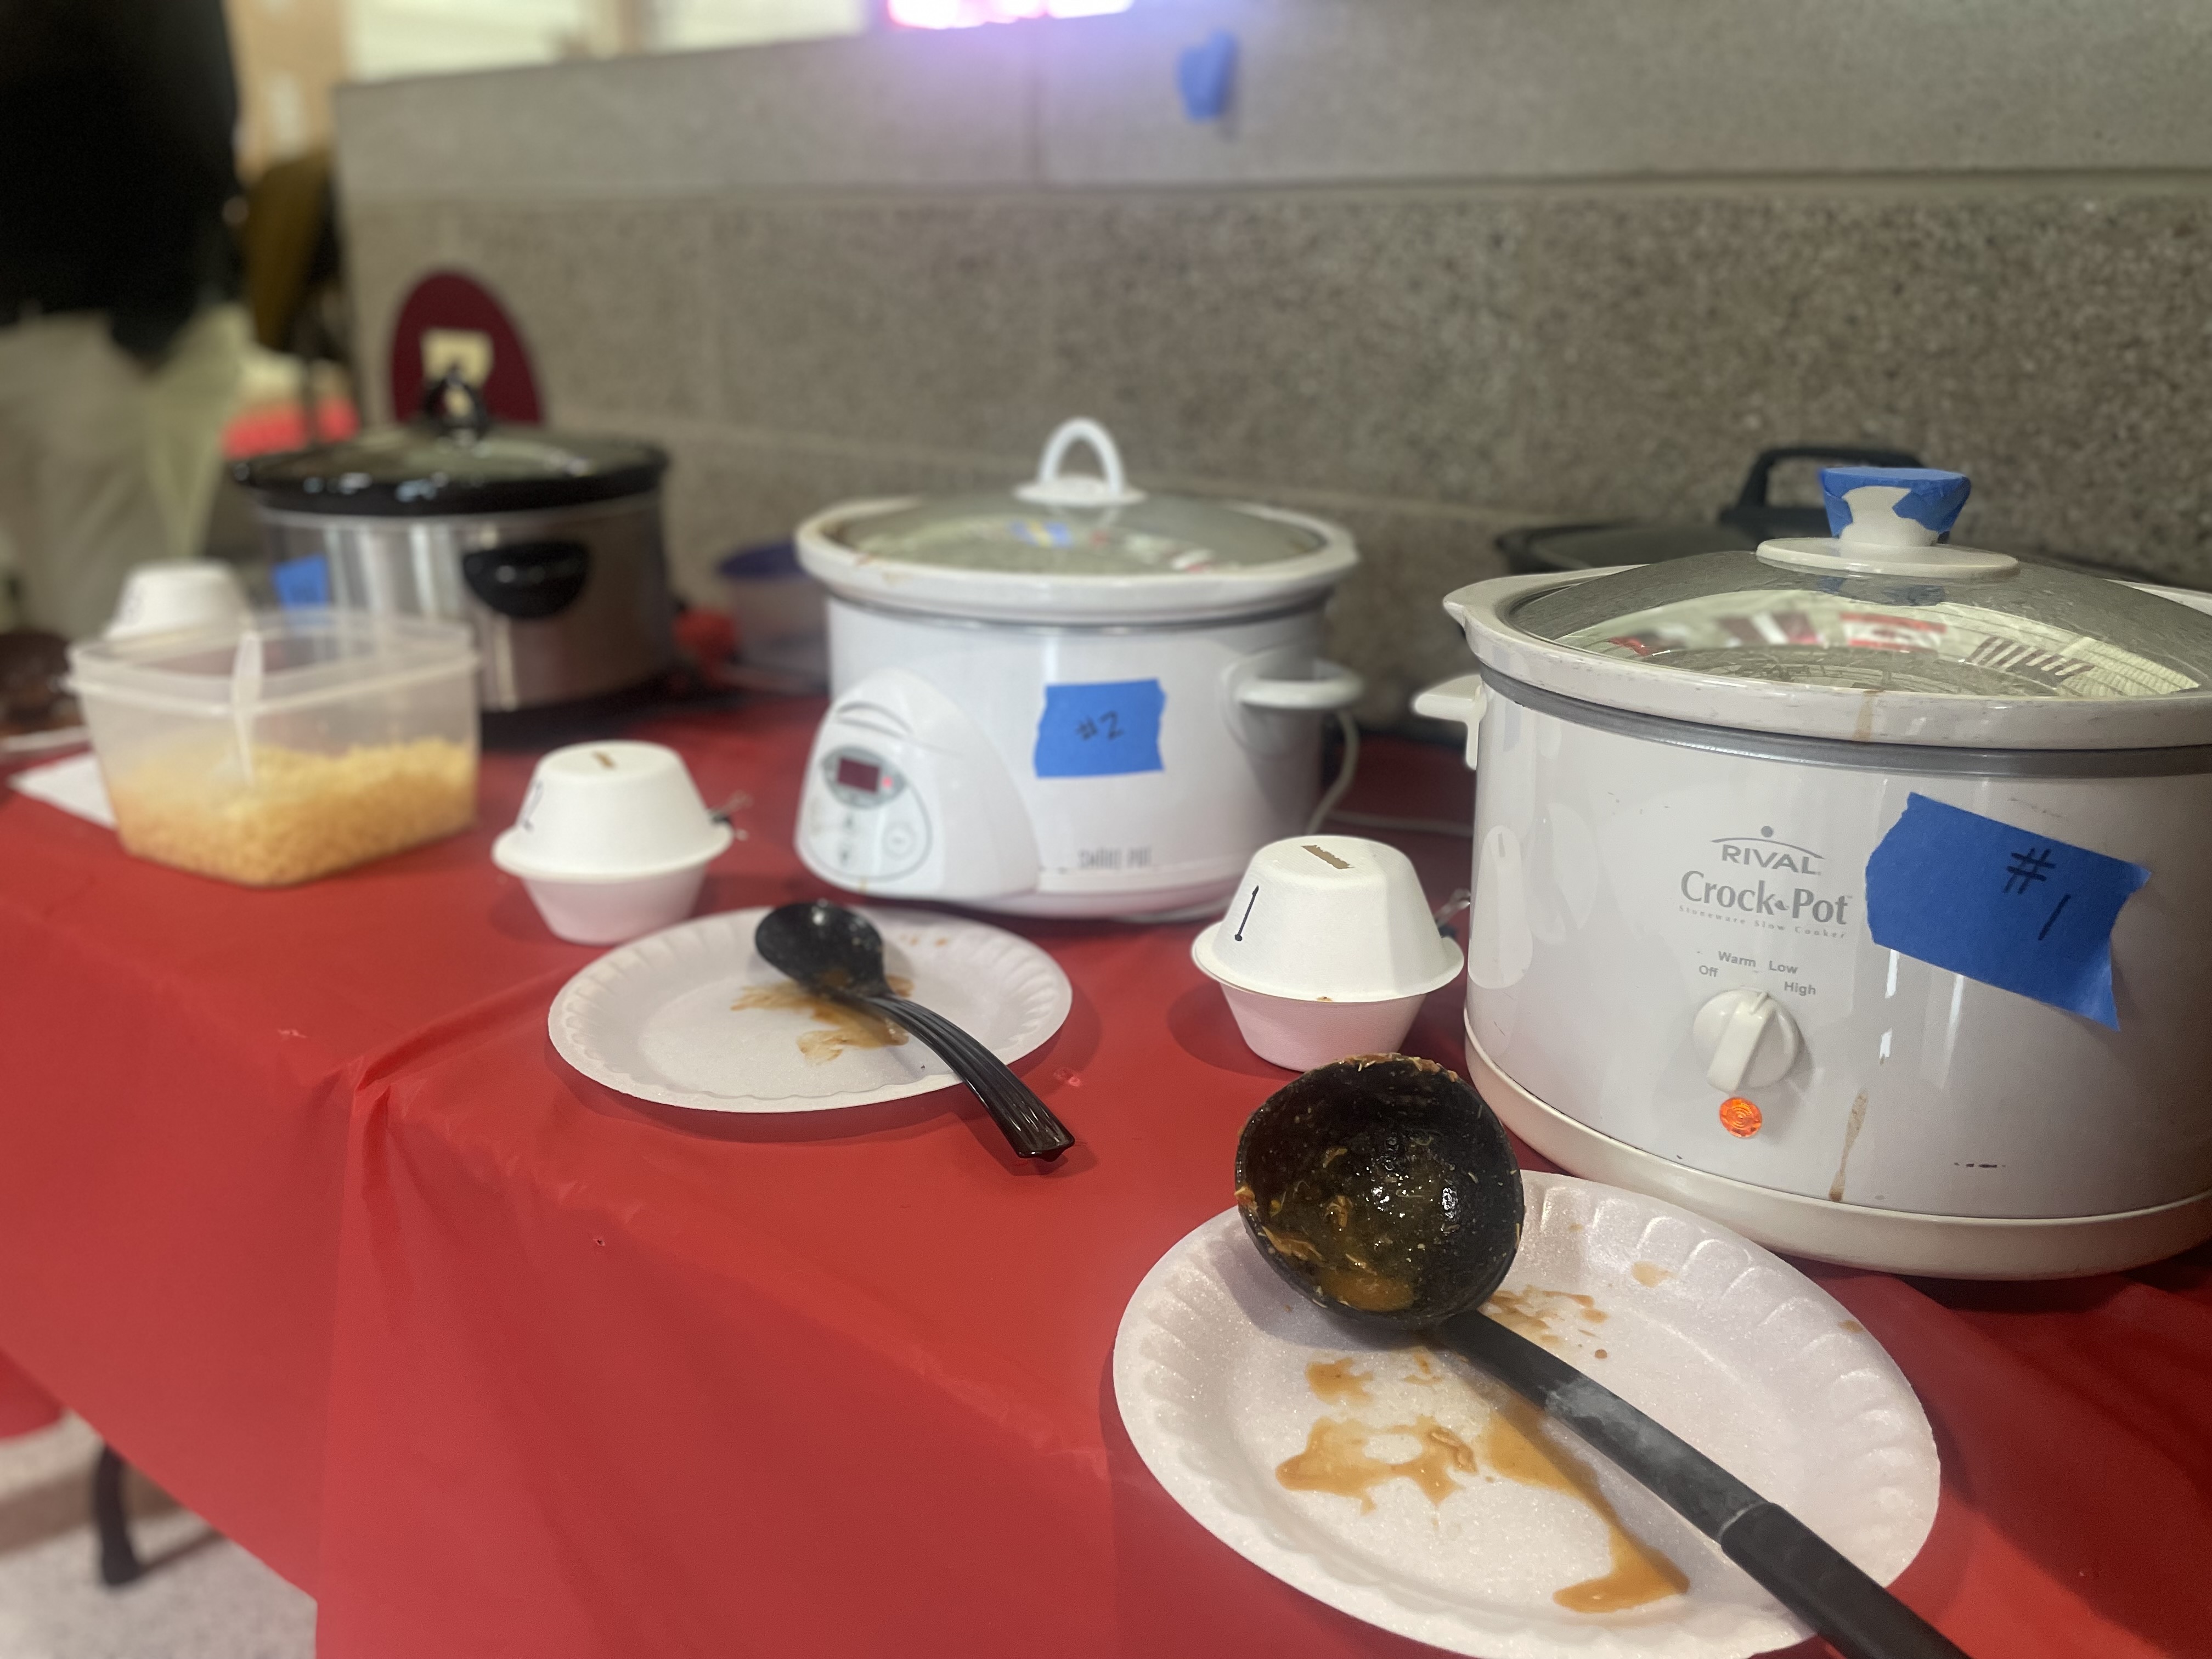 Crock pots full of chili with ladles on plates in front